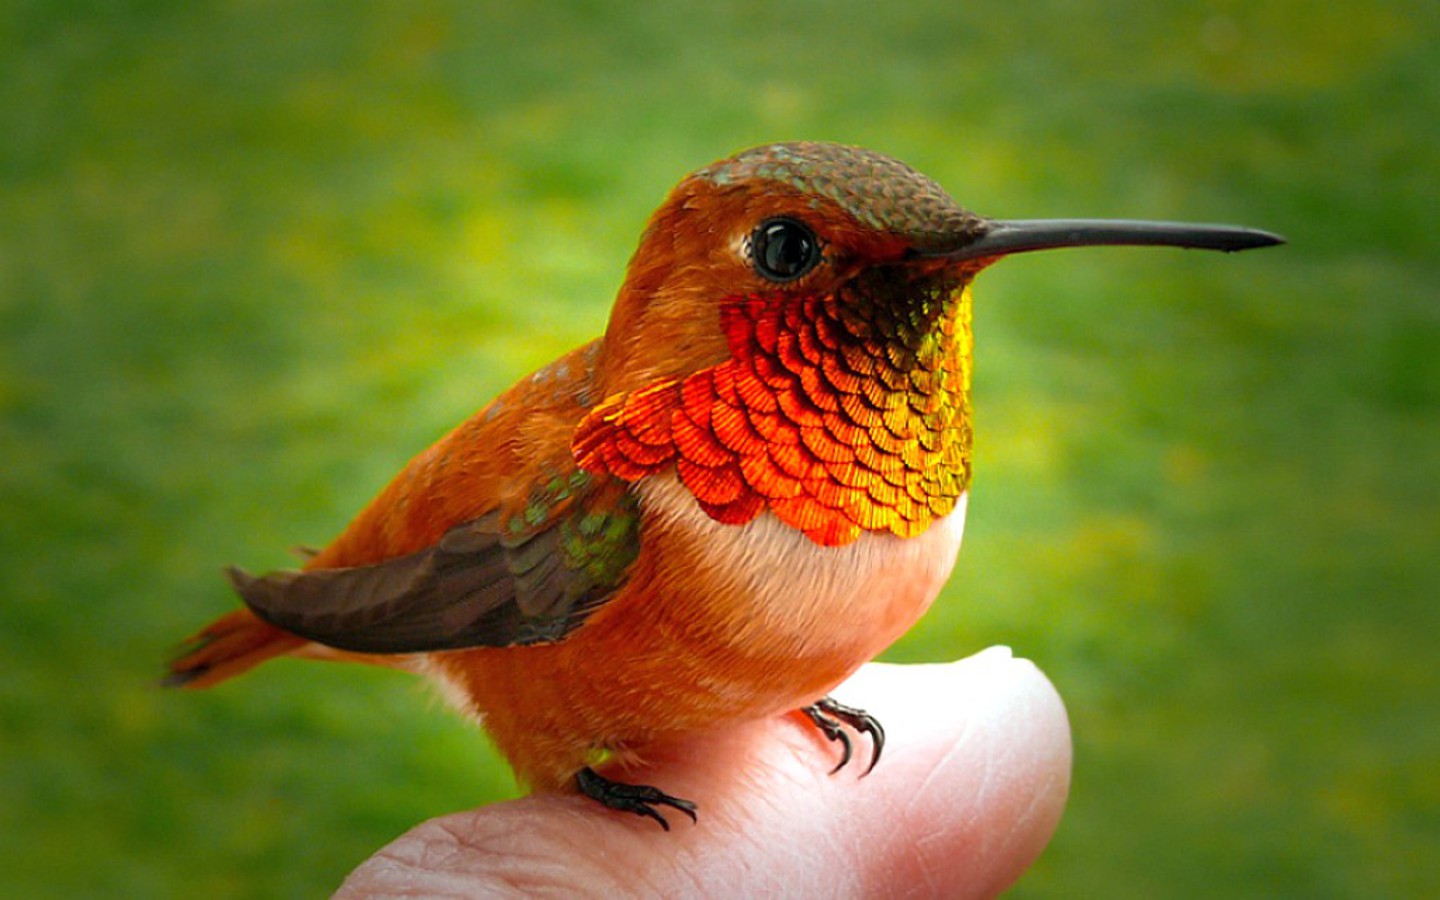 weighing less than two grams the smallest hummingbird is hummingbird